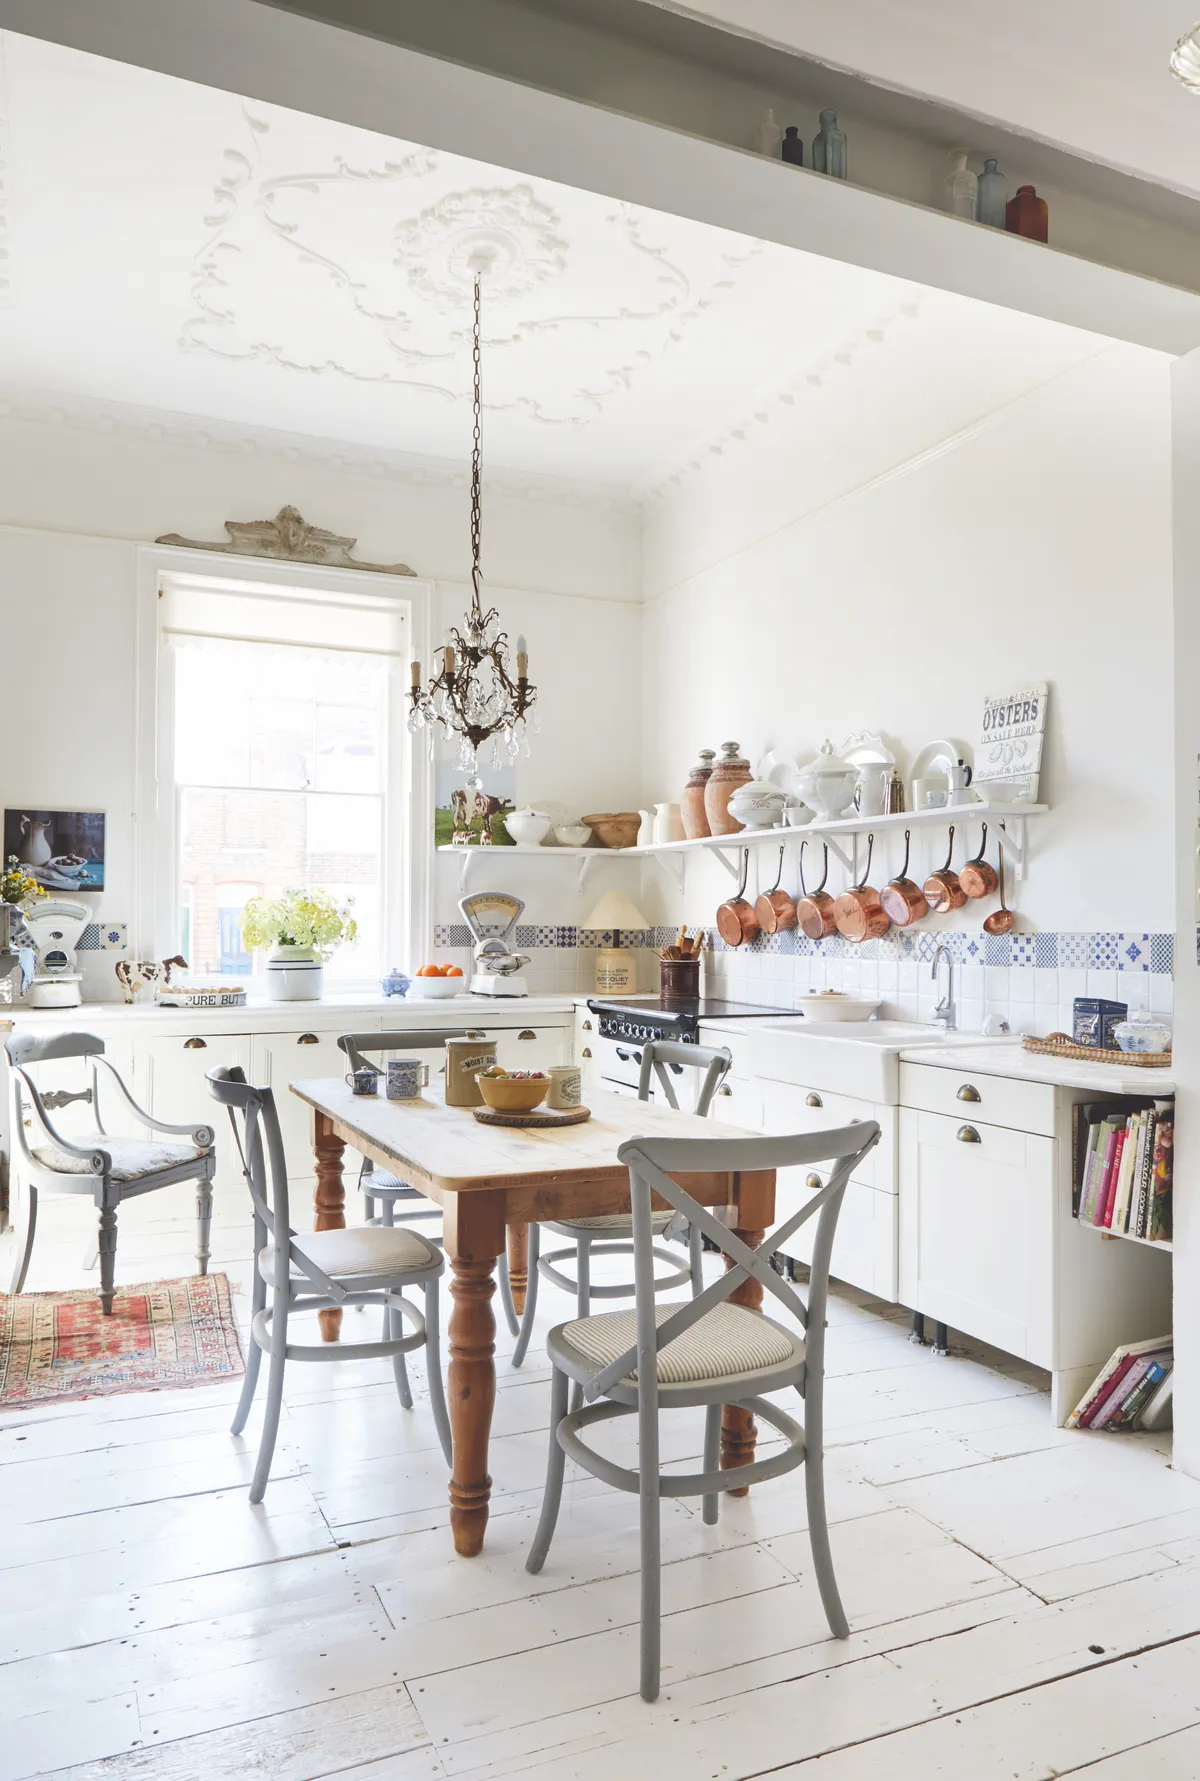 A light and bright country kitchen with antique copper pans and vintage ceramics